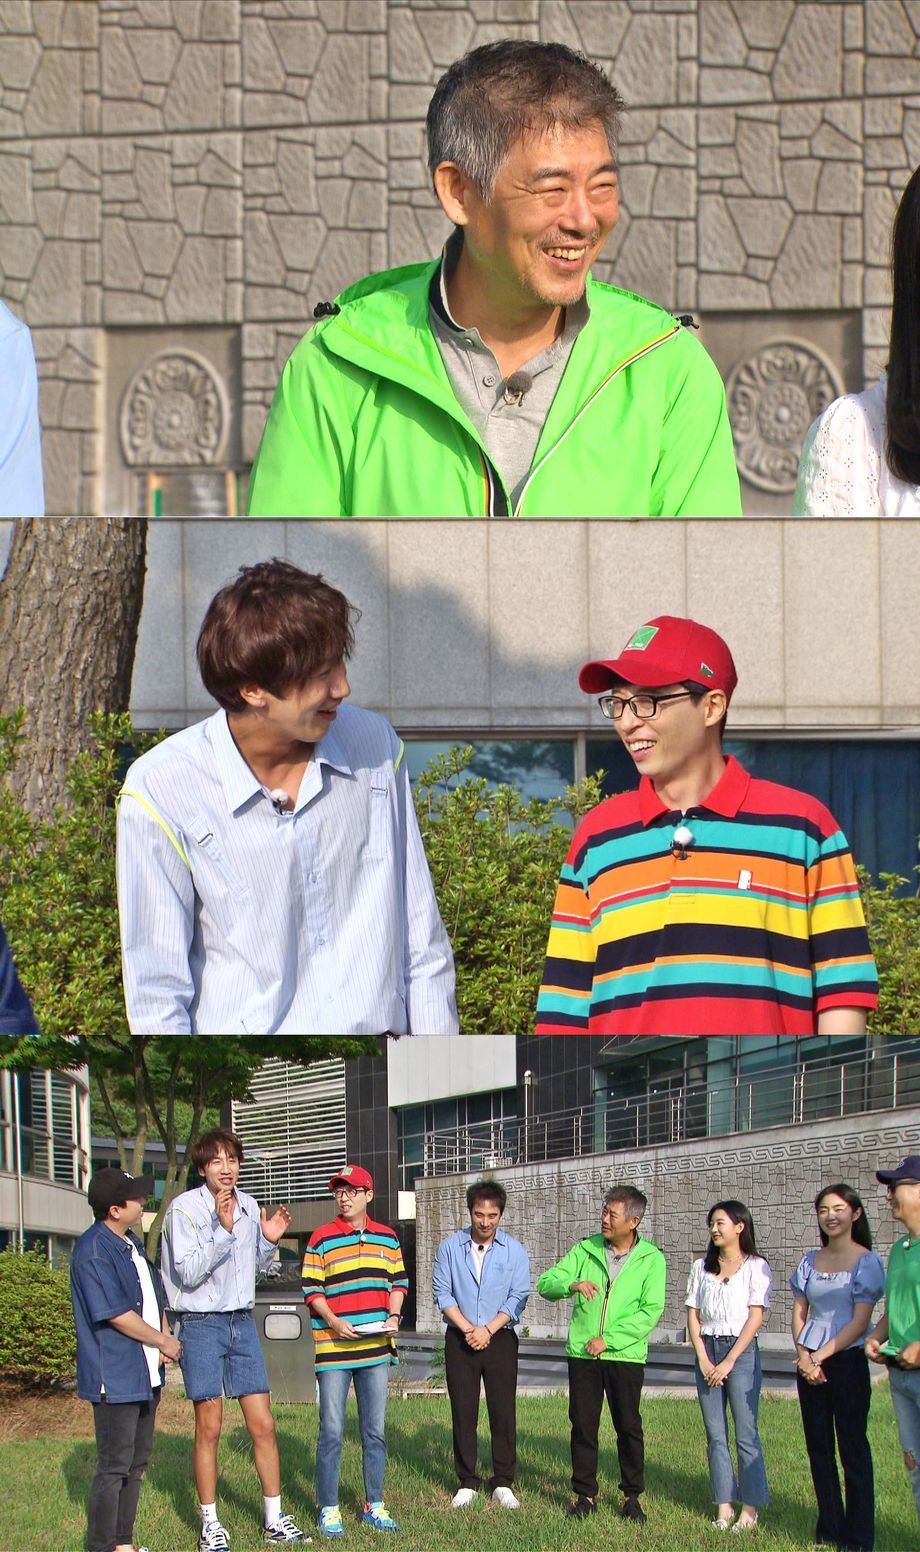 On SBS Running Man, which will be broadcast on the 11th, actors Sung Dong-il, Bae Seong-woo, Jo Hyun and Kim Hye-joon of the movie transform will appear.In a recent recording, Lee Kwang-soo was not happy to see the usual friends Sung Dong-il and Bae Seong-woo.Sung Dong-il and Bae Seong-woo also showed friendly looks towards Lee Kwang-soo.Sung Dong-il said, We have been in a relationship for several years.But he immediately followed up with Bomb remarks and embarrassed Lee Kwang-soo.Sung Dong-il said, Lee Kwang-soo is when I shoot a movie ... and opened the scene to ruin the scene. Yoo Jae-Suk said, I do not know why I keep taking a comedian junior gwangsu in the movie version.I do it because he keeps calling me. Lee Kwang-soo was embarrassed by the squealing of Sung Dong-il and Yoo Jae-Suk toward Lee Kwang-soo, and Sung Dong-il and Yoo Jae-Suk did not stop playing with each other, saying that they were high-suffering.In the end, Lee Kwang-soo shouted, The two people who tightened my breath gathered here.It can be found on Running Man which is broadcasted at 5 pm on Sunday, 11th.